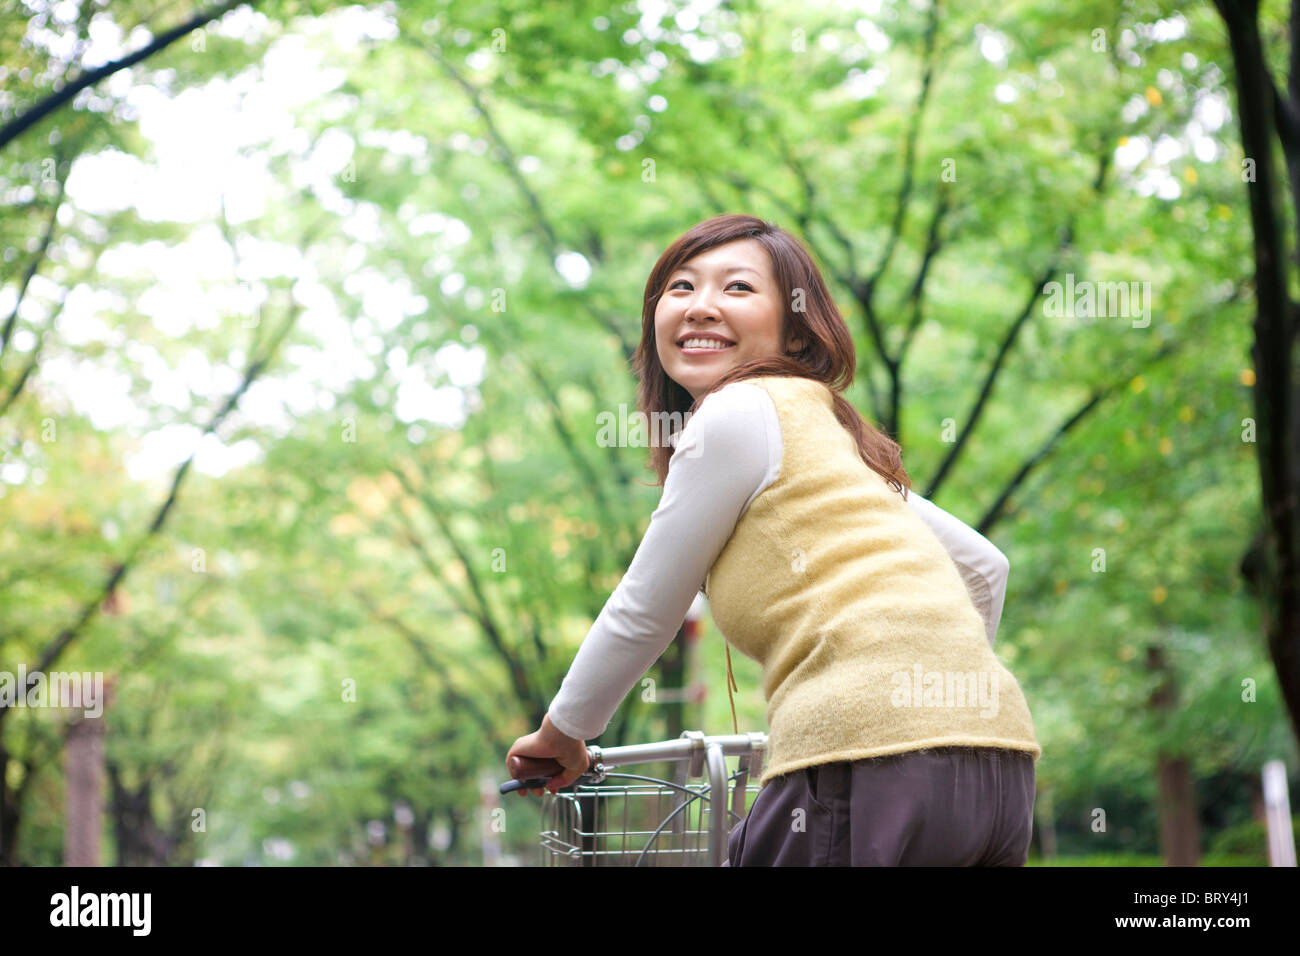 Young woman riding bicycle, smiling Stock Photo